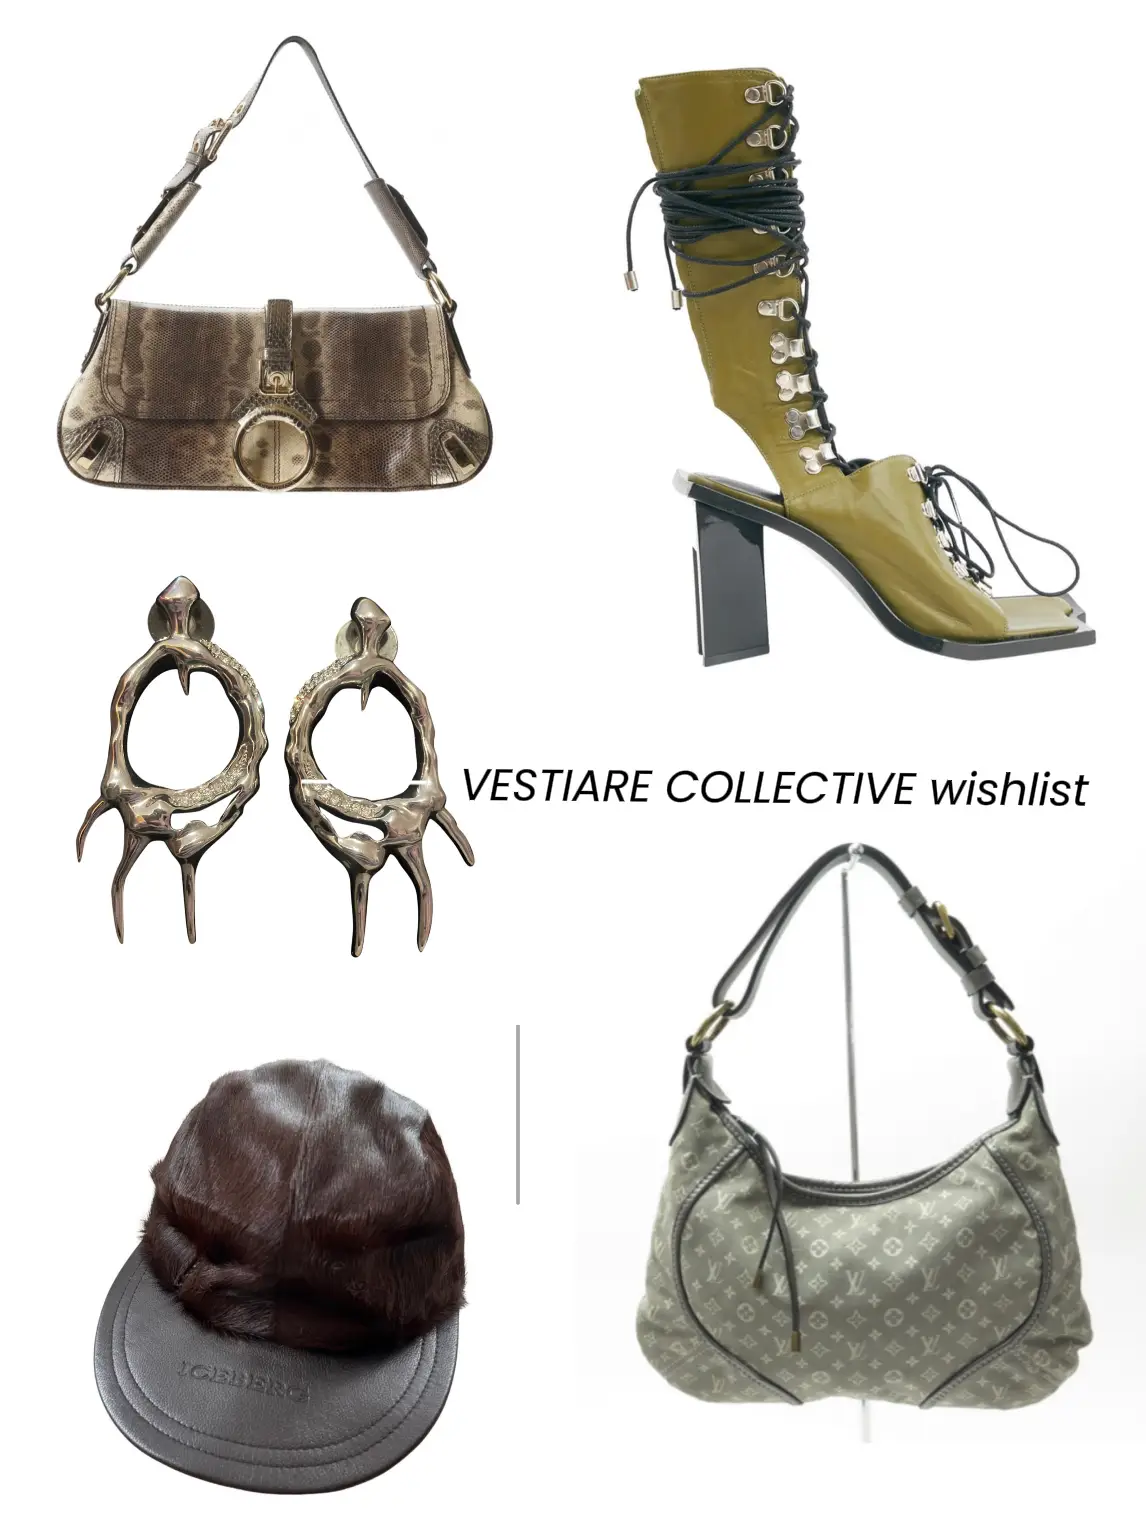 Unboxing of Pre-Loved Luxury Handbag from Vestiaire Collective 